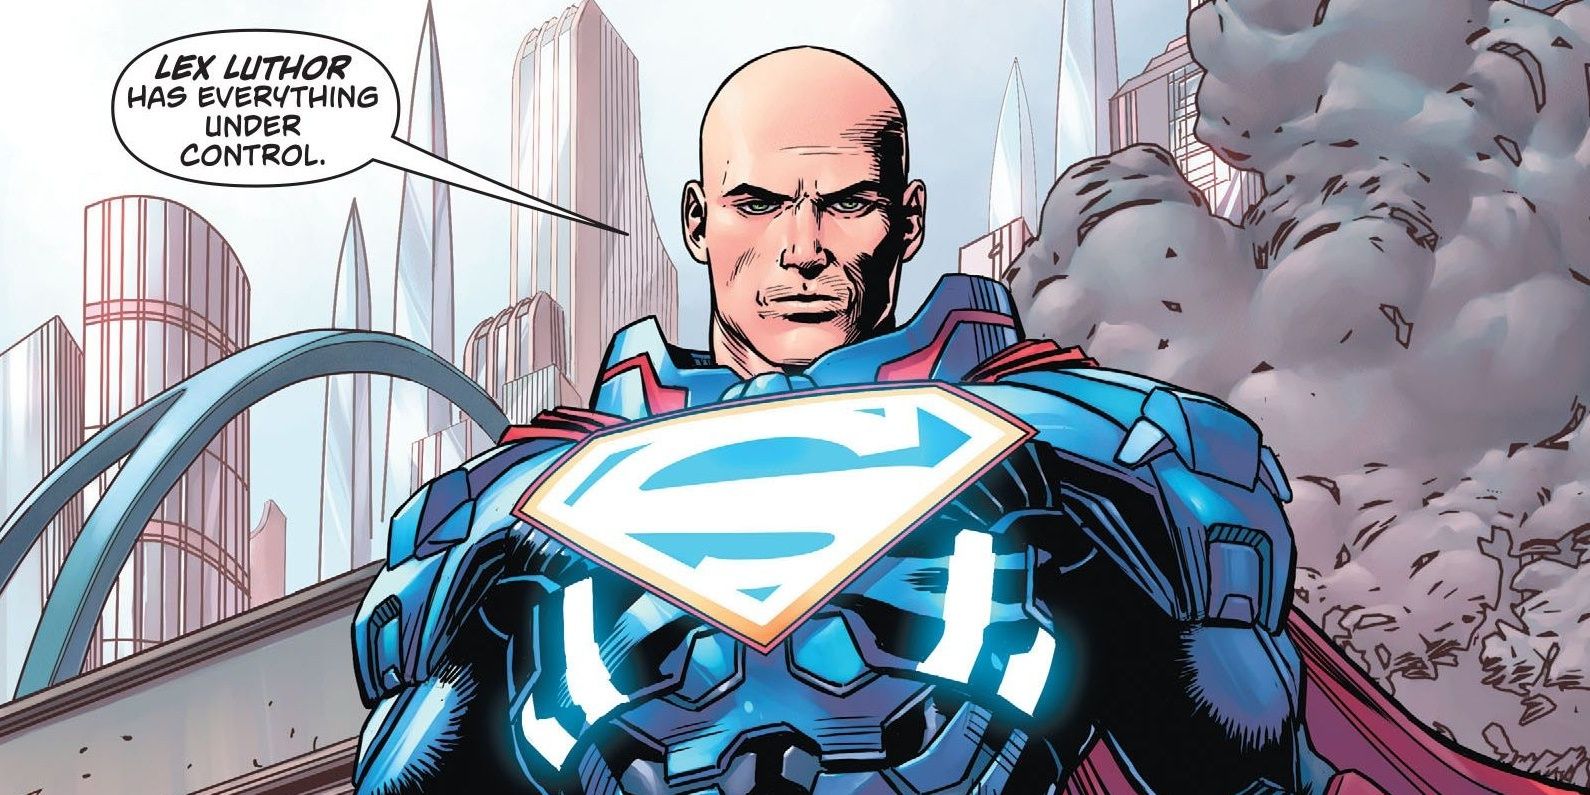 Lex Luthor, wearing the Symbol of the House of El